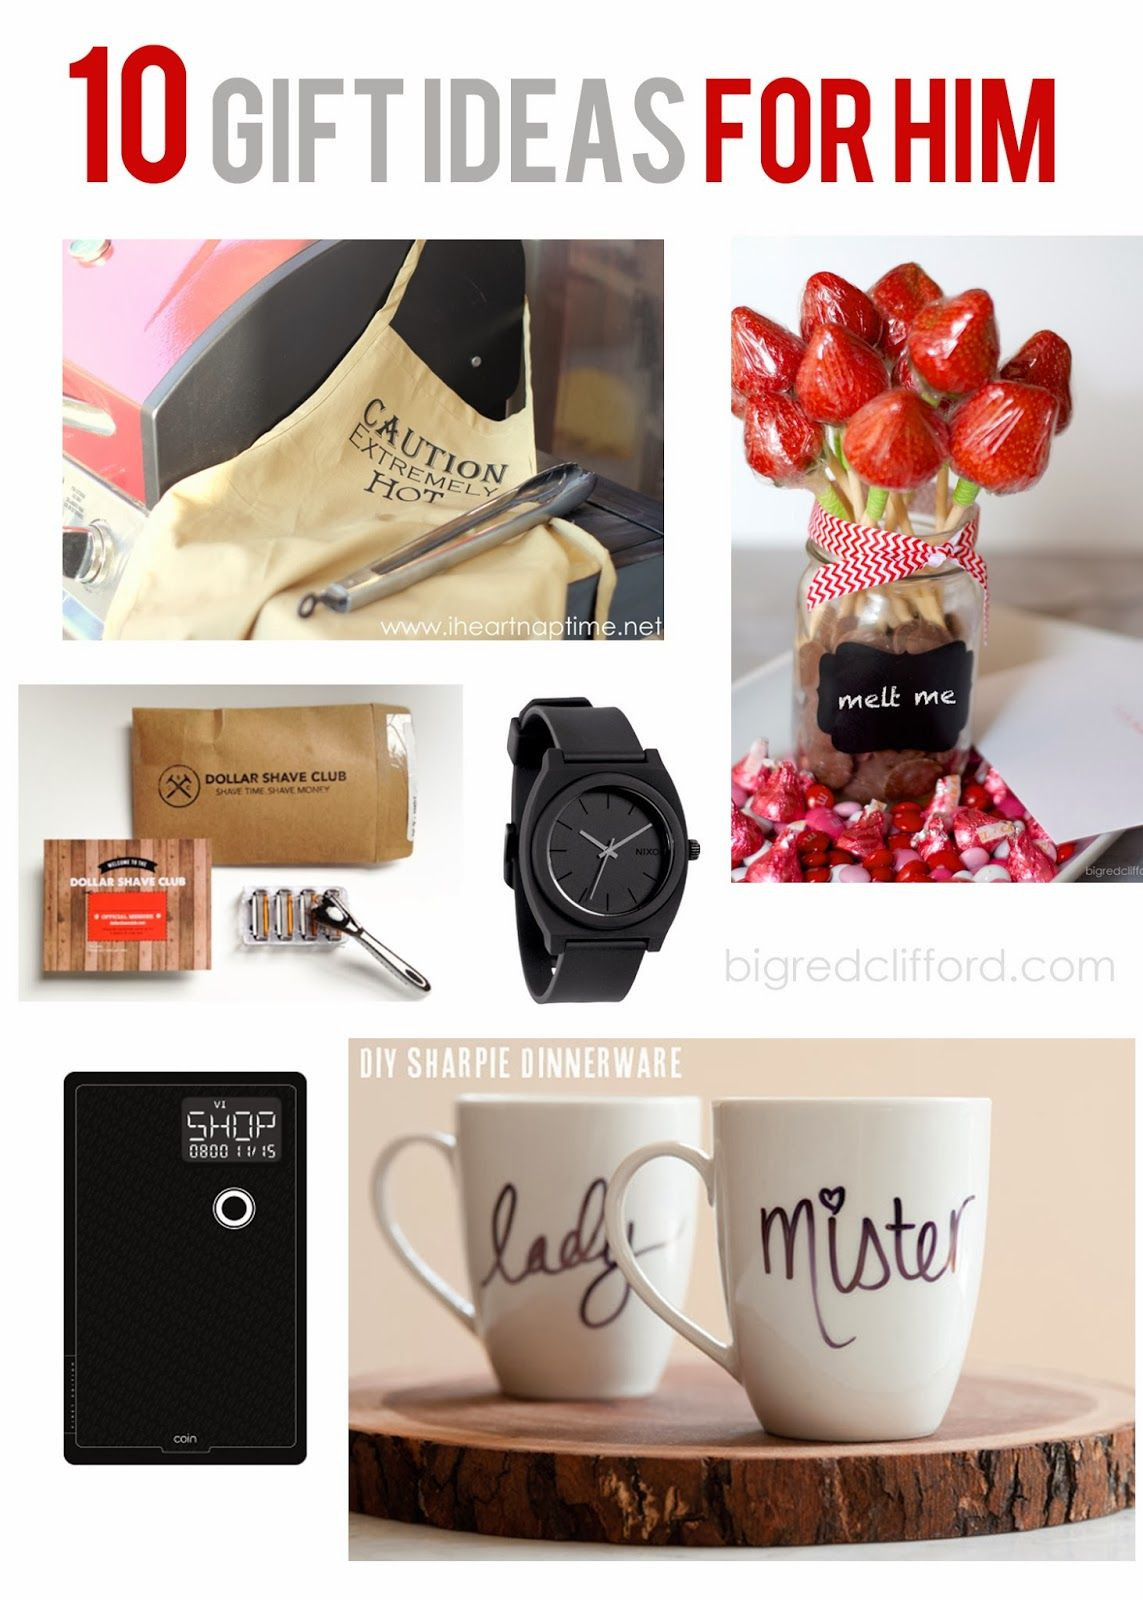 Valentine Gift Ideas For A Male Friend
 valentines ideas for HIM